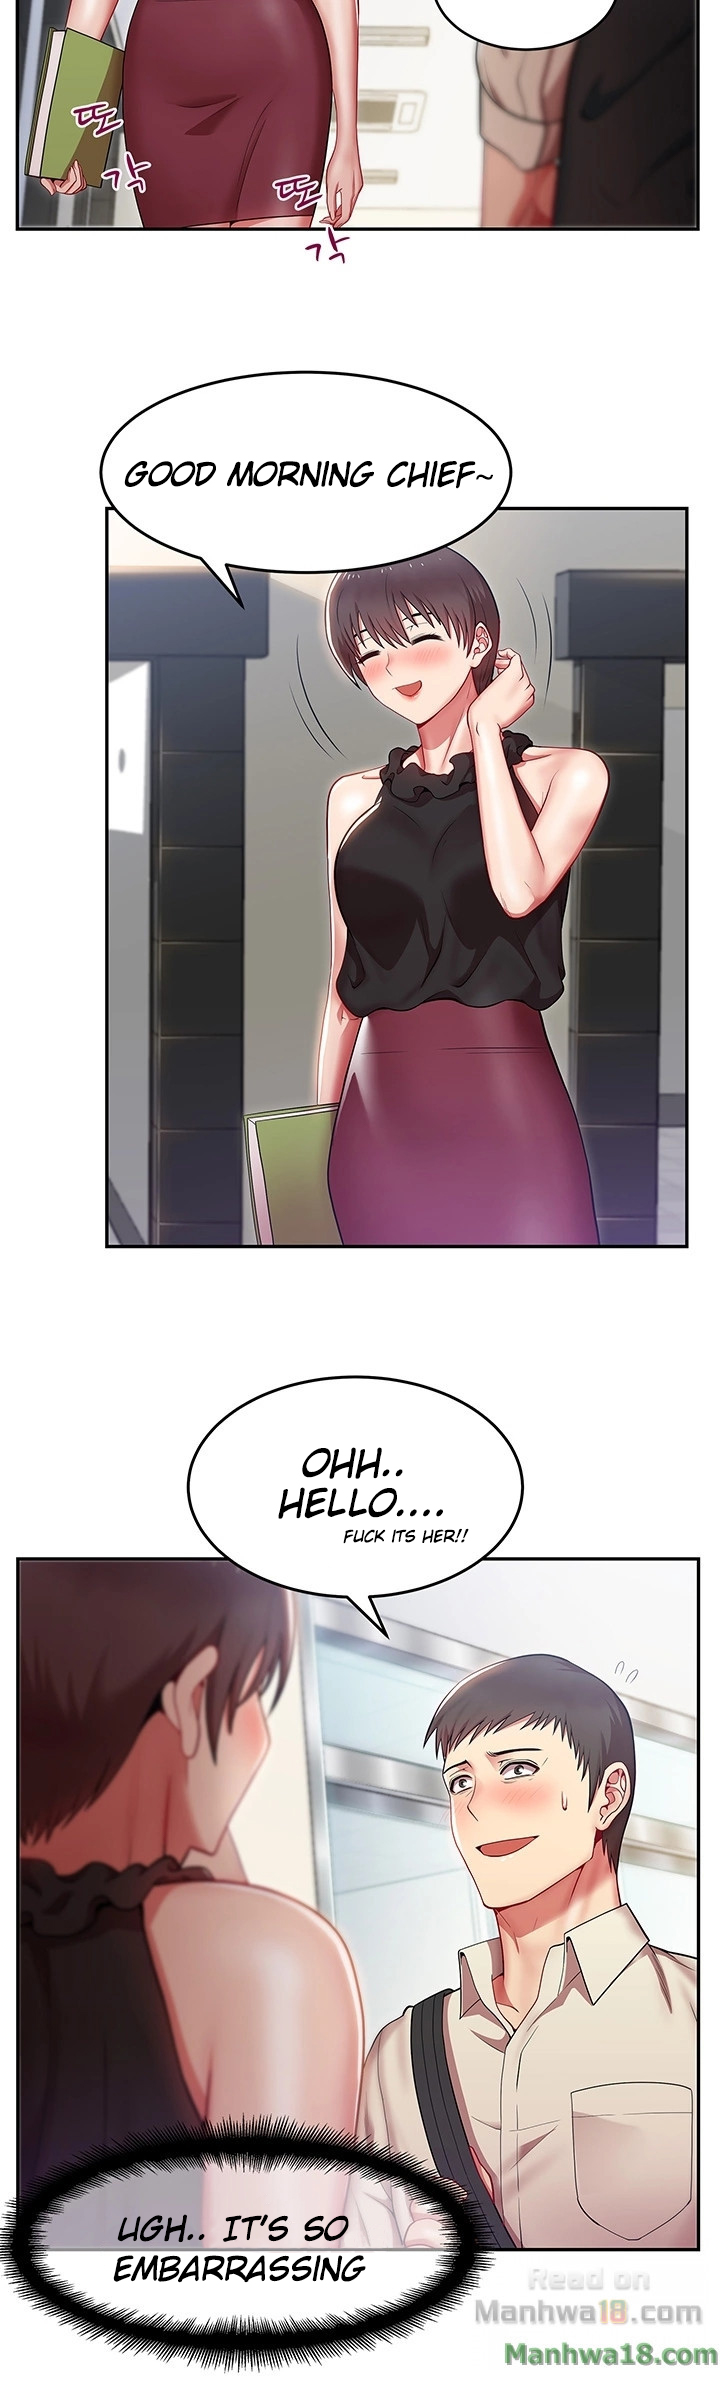 My Wife’s Friend - Chapter 1 Page 32